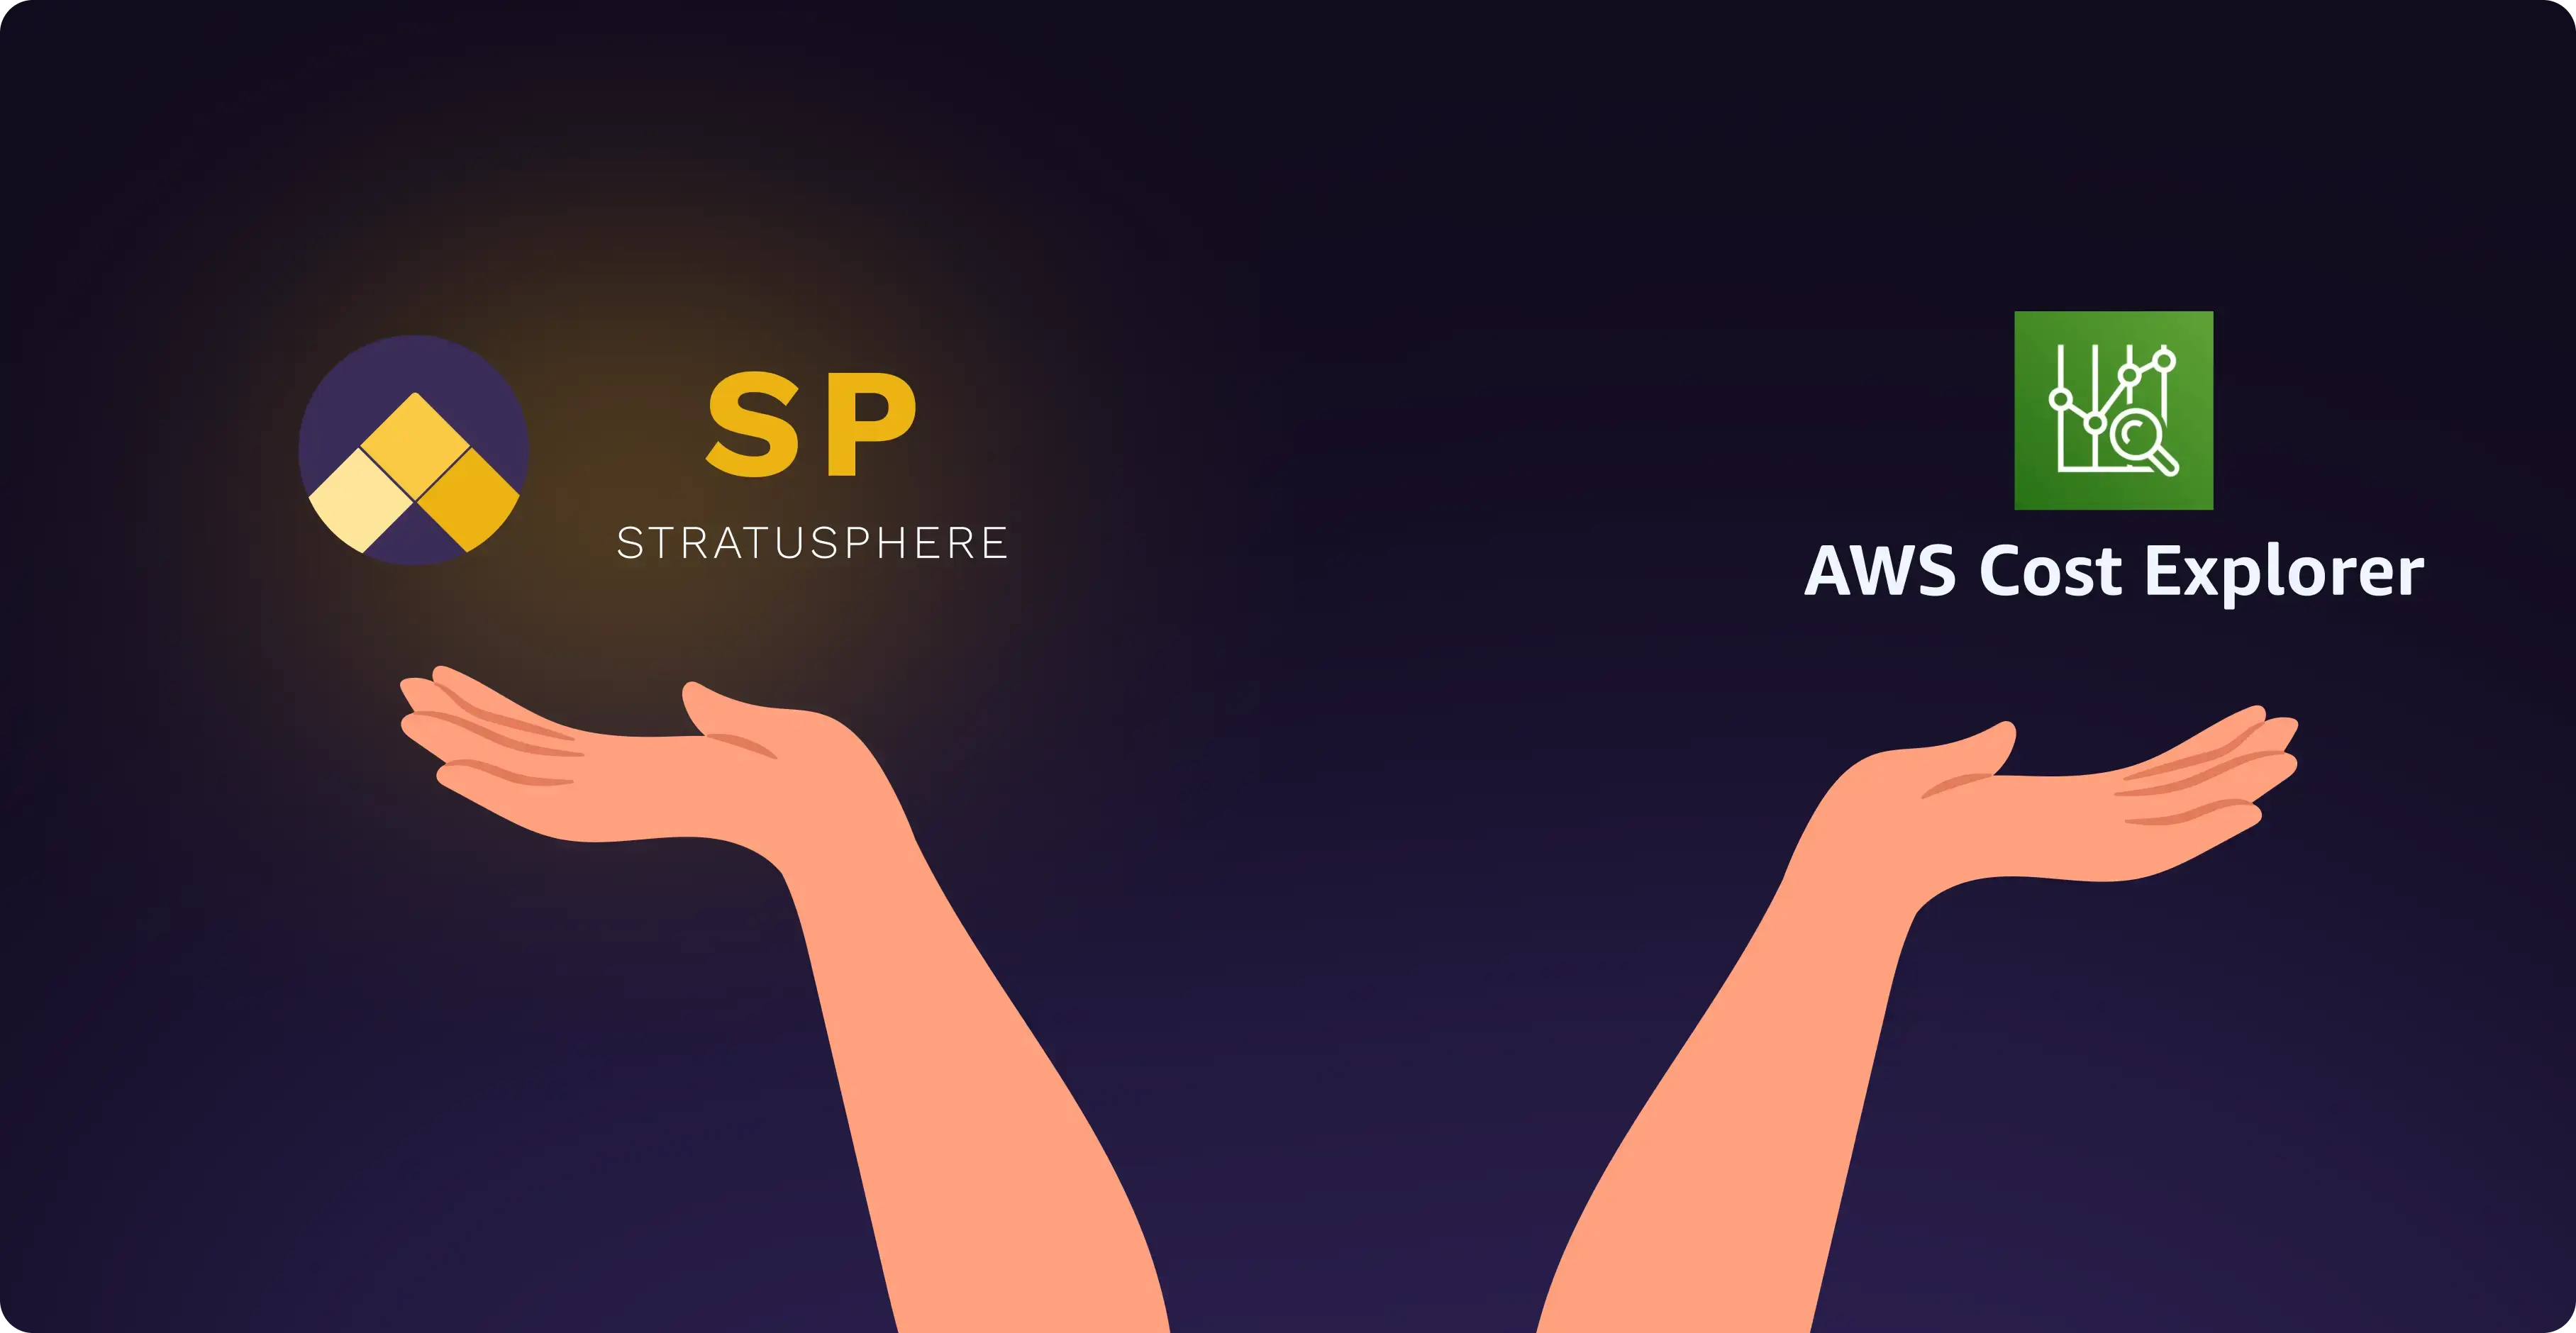 two pink hands holding up the stratusphere logo and the aws cost explorer logo against a dark purple background